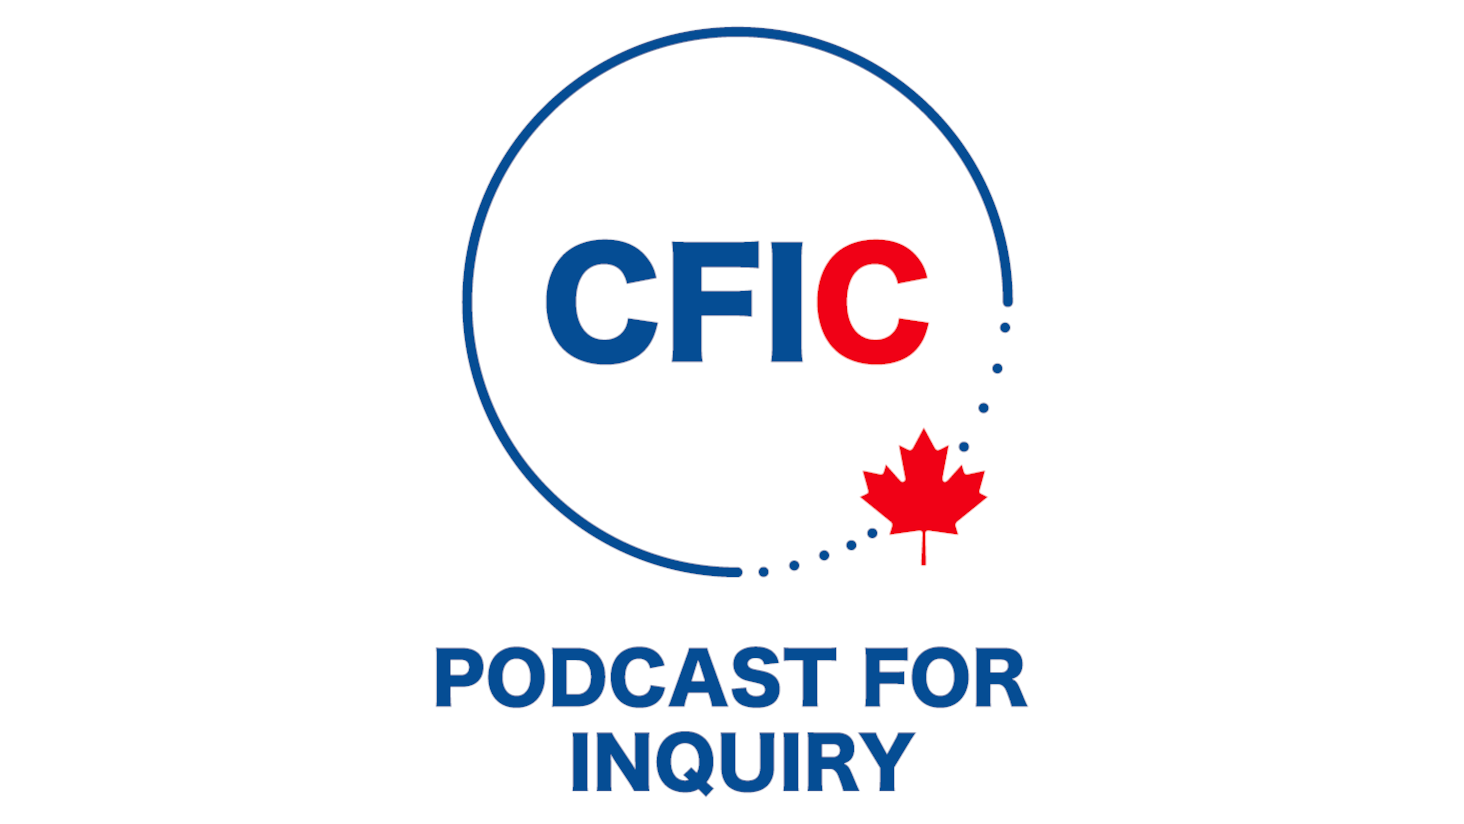 Introducing the Podcast for Inquiry